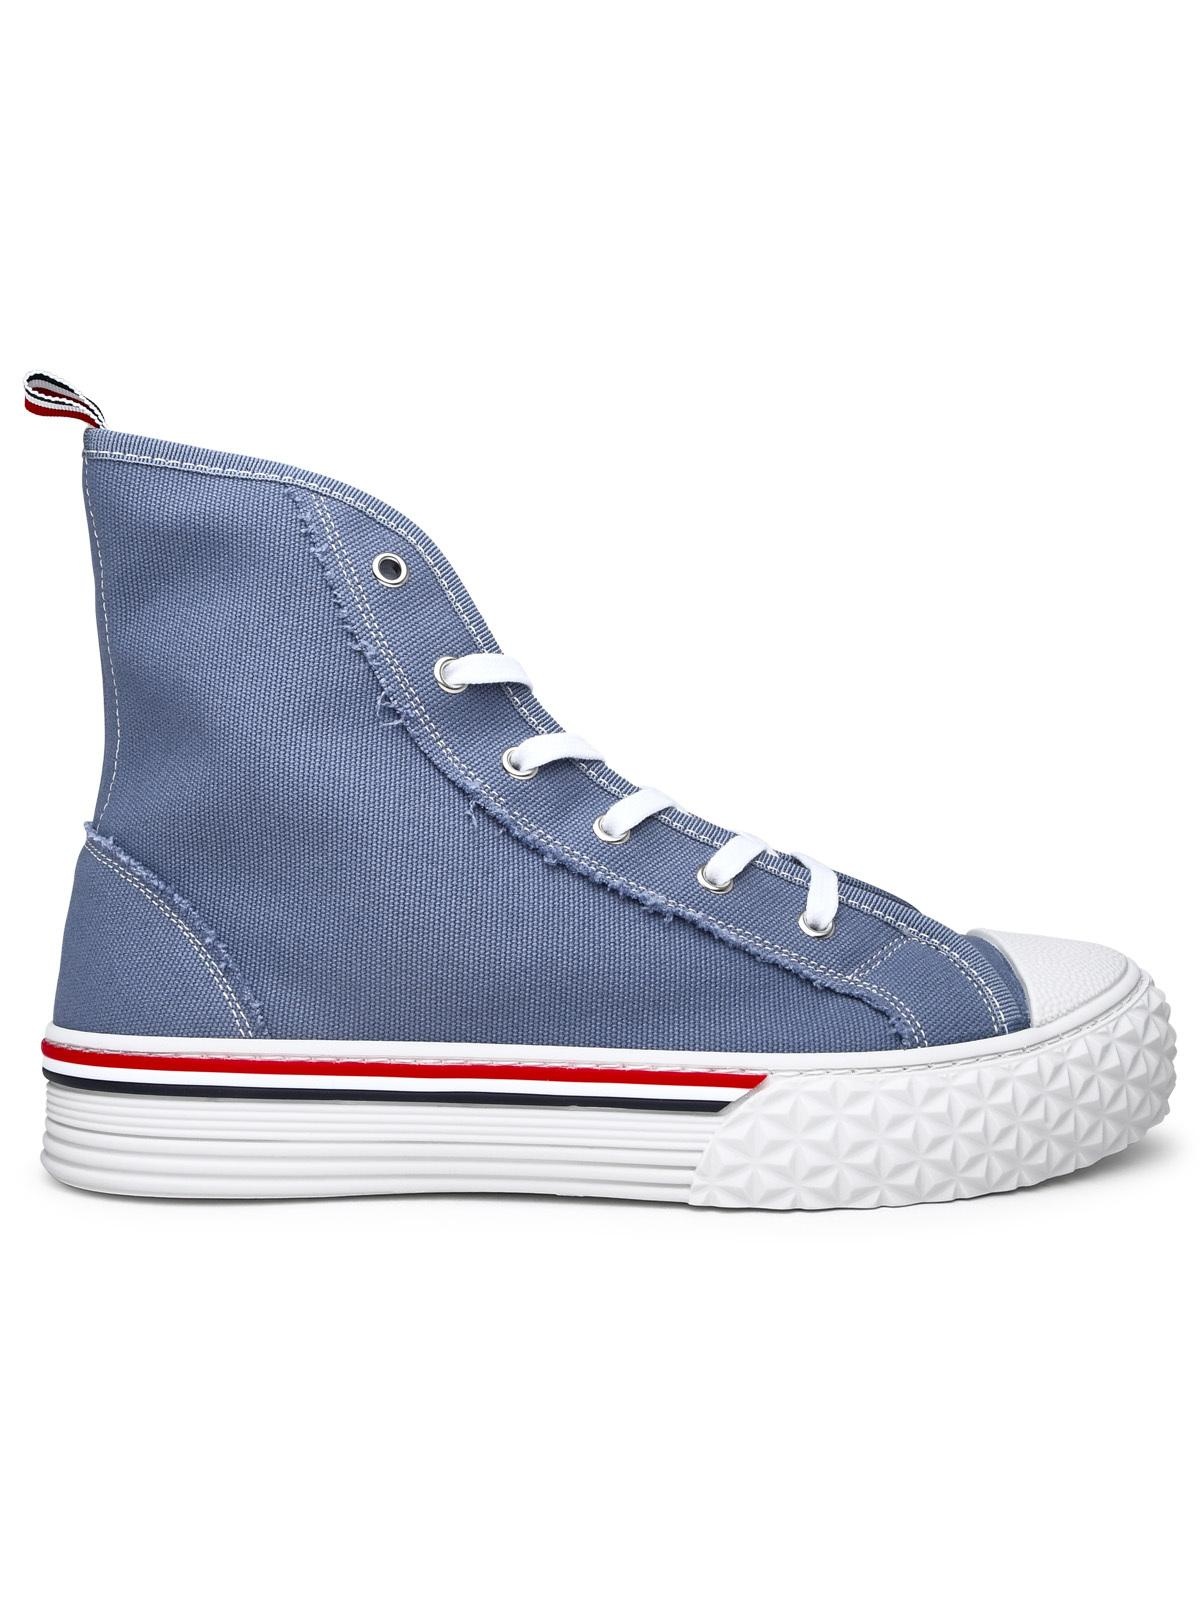 Thom Browne Sneakers In Light Blue Canvas Man - 1